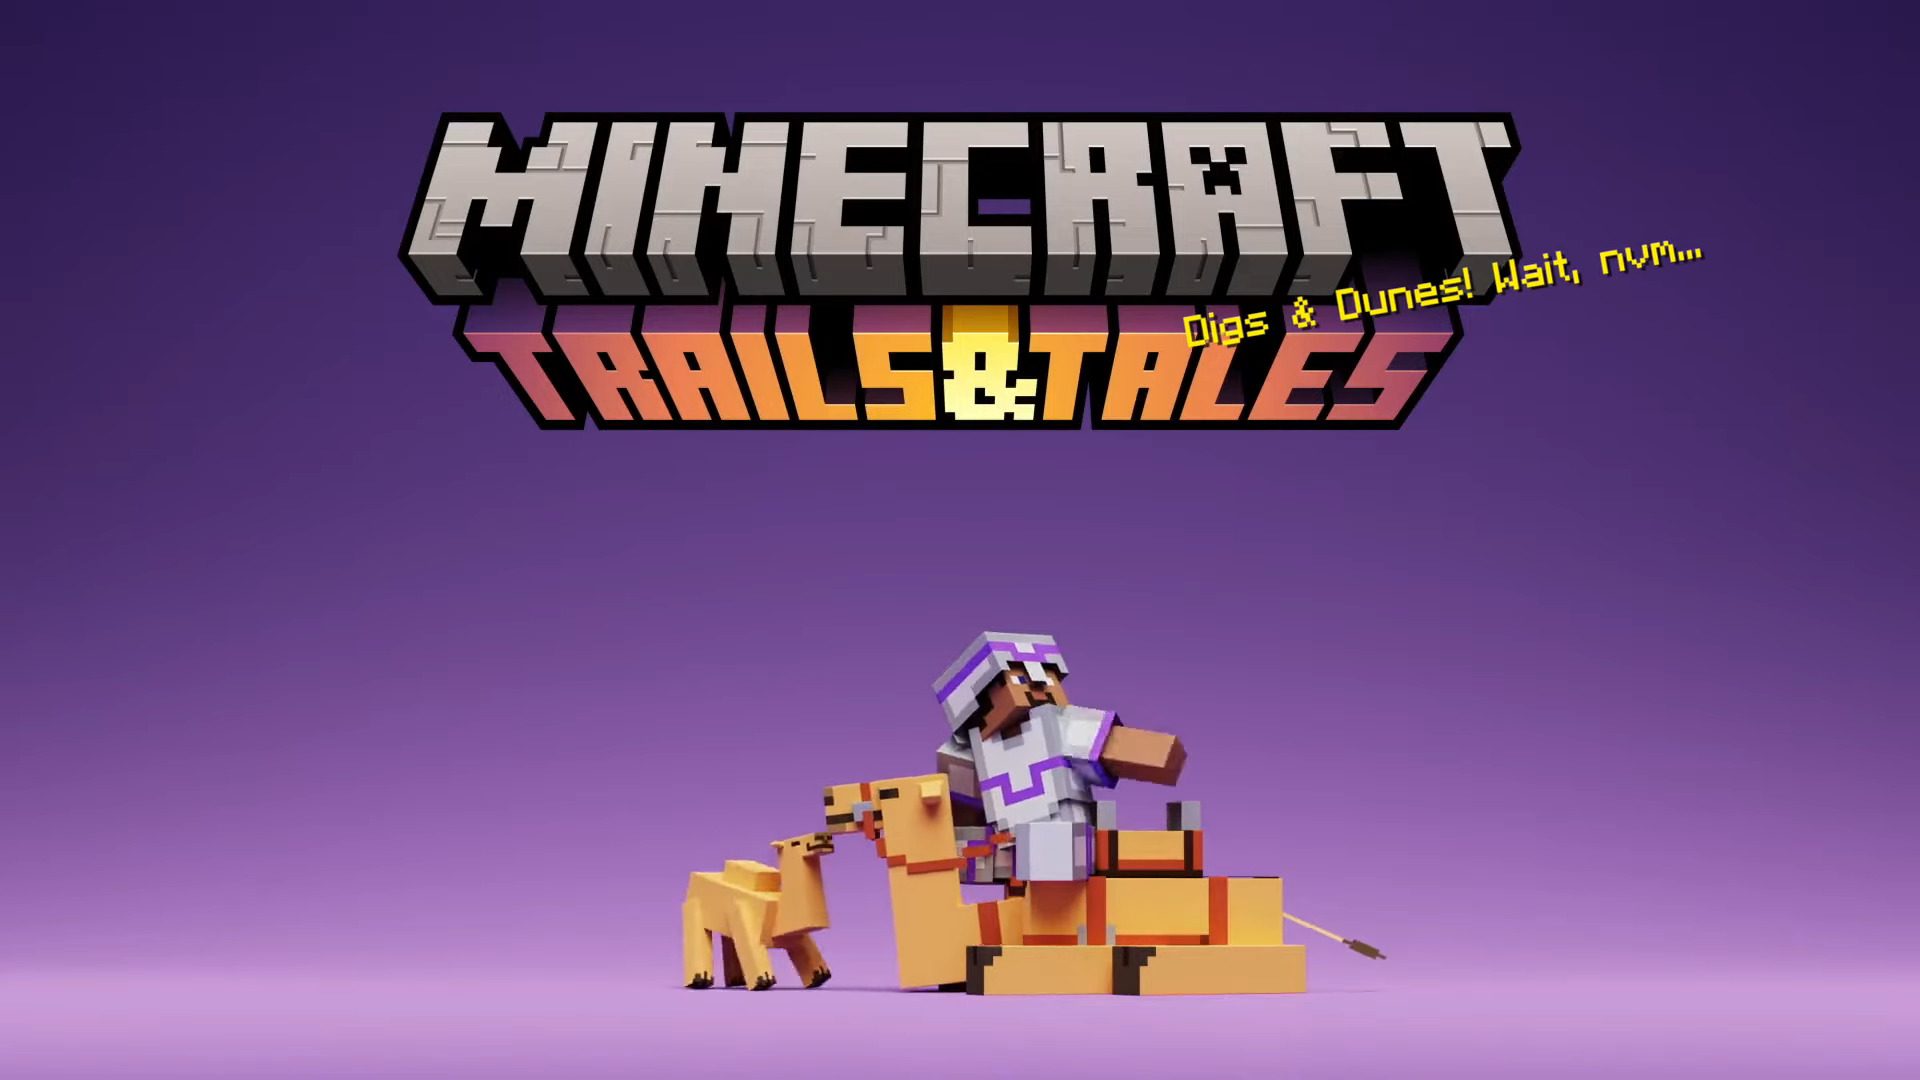 Minecraft 1.20 Trails & Tales update APK download file to be